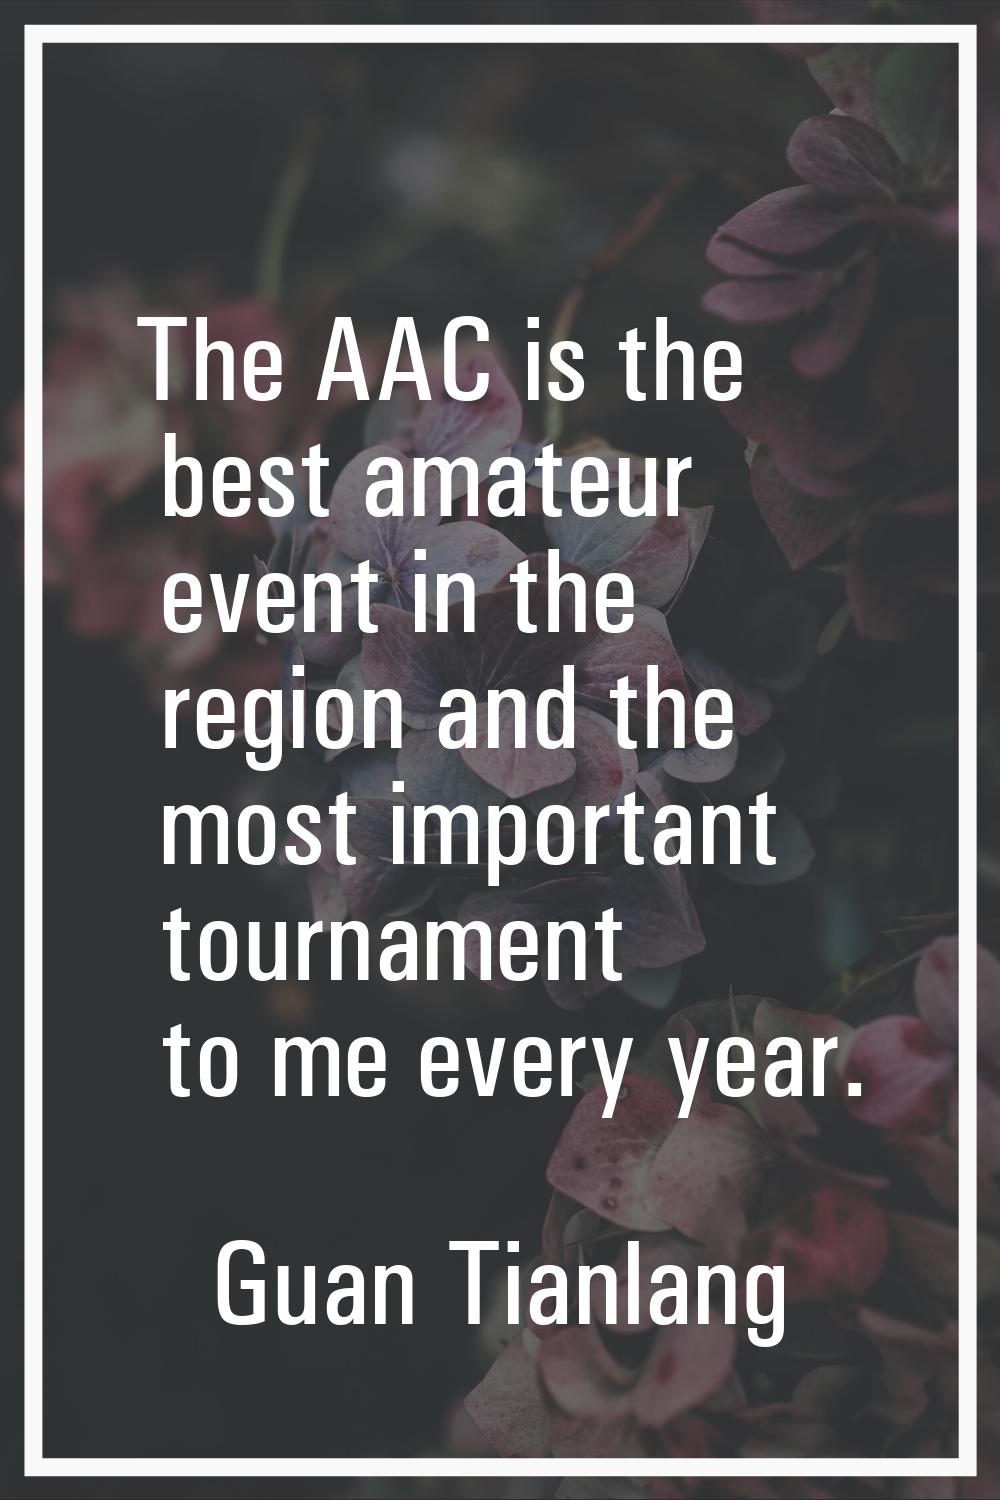 The AAC is the best amateur event in the region and the most important tournament to me every year.